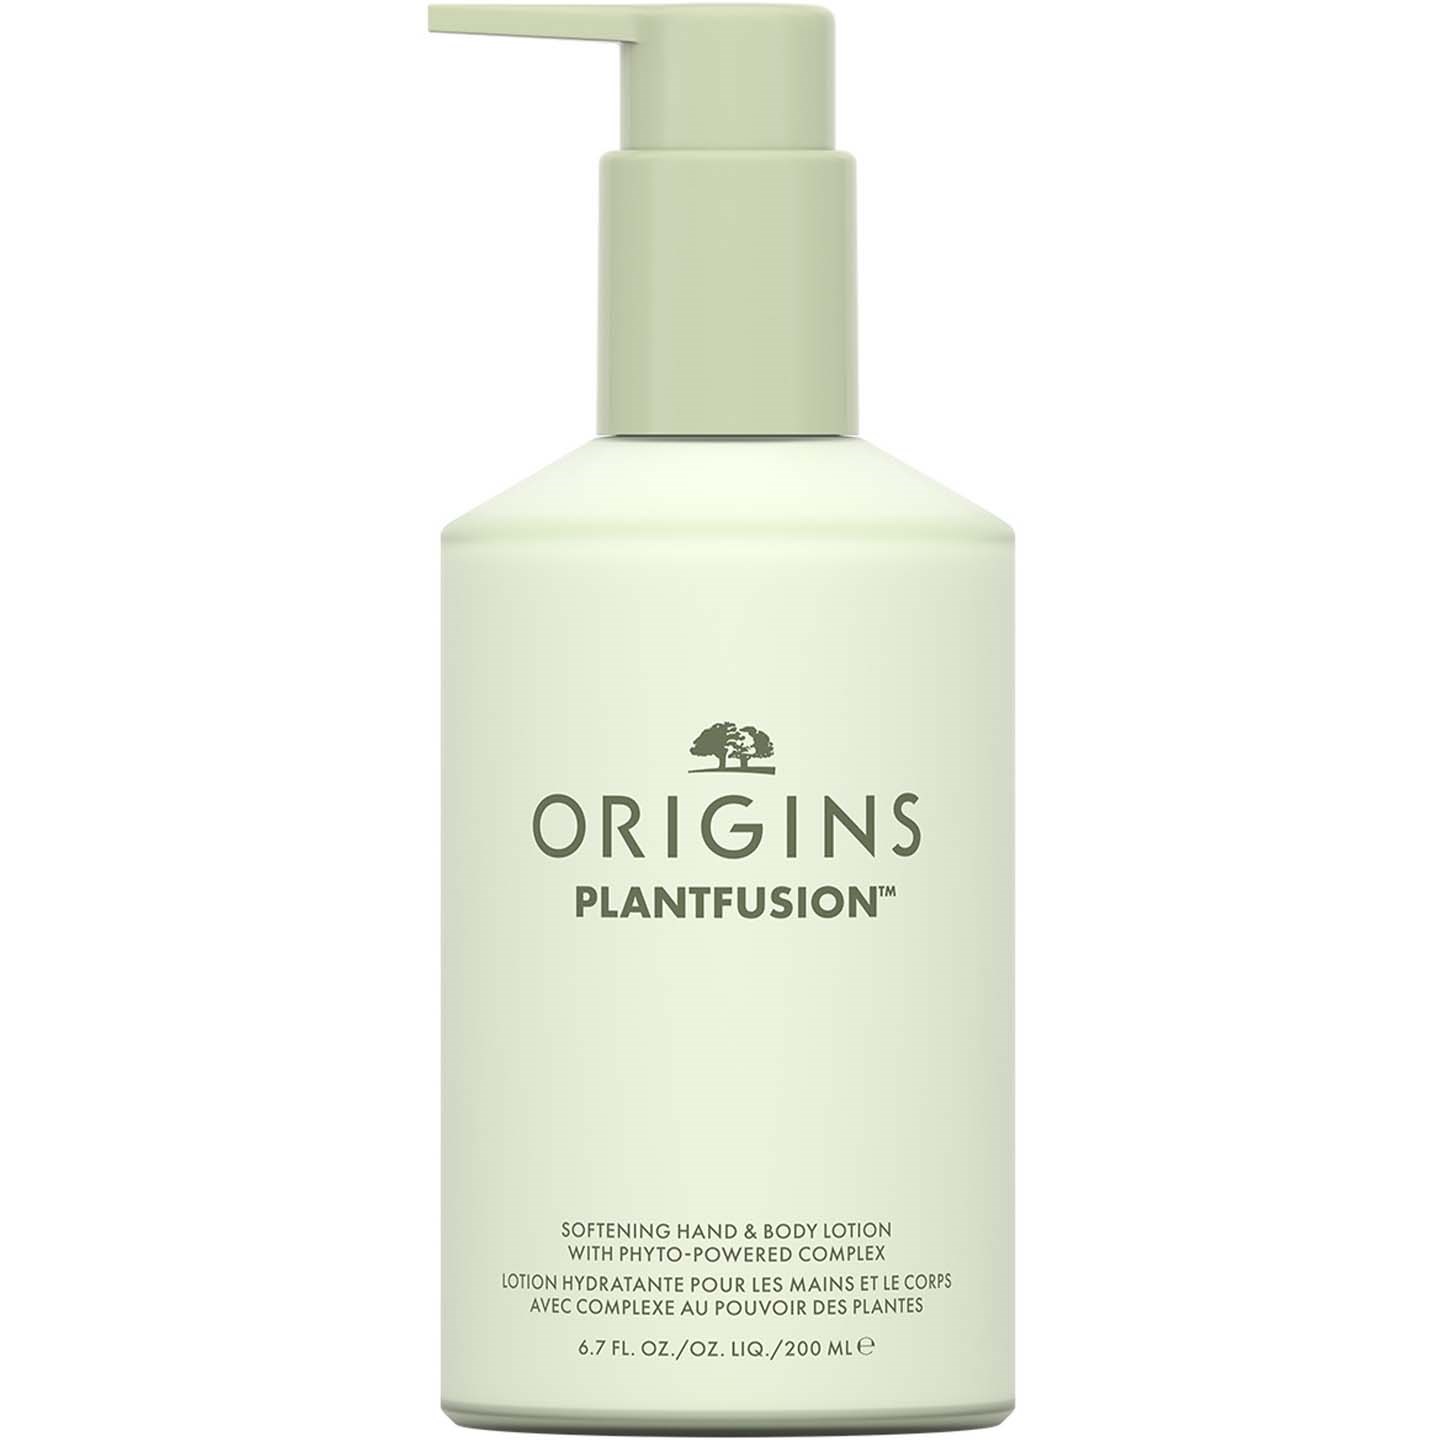 Origins Plantfusion Softening Hand & Body Lotion With Phyto-Powered Co